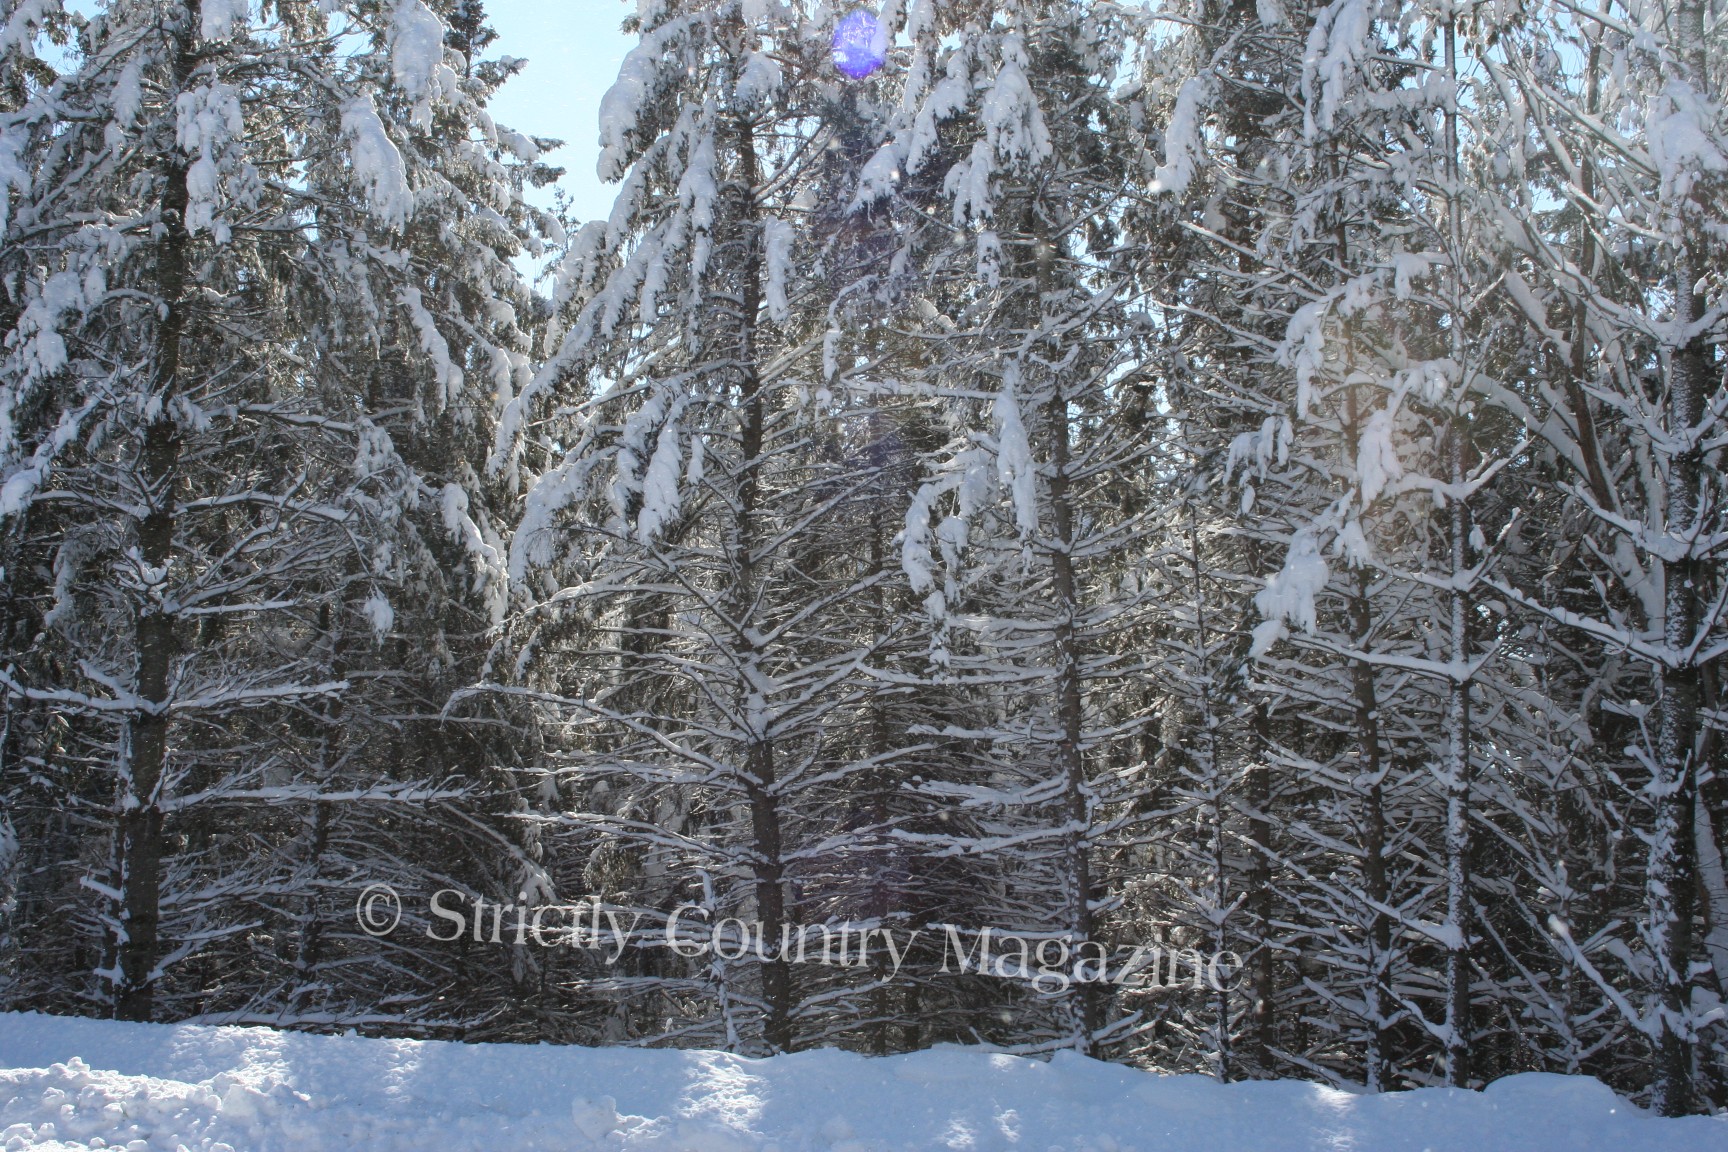 Strictly Country Magazine Copyright A Northwoods Country Christmas 25 Romantic Days of Christmas image